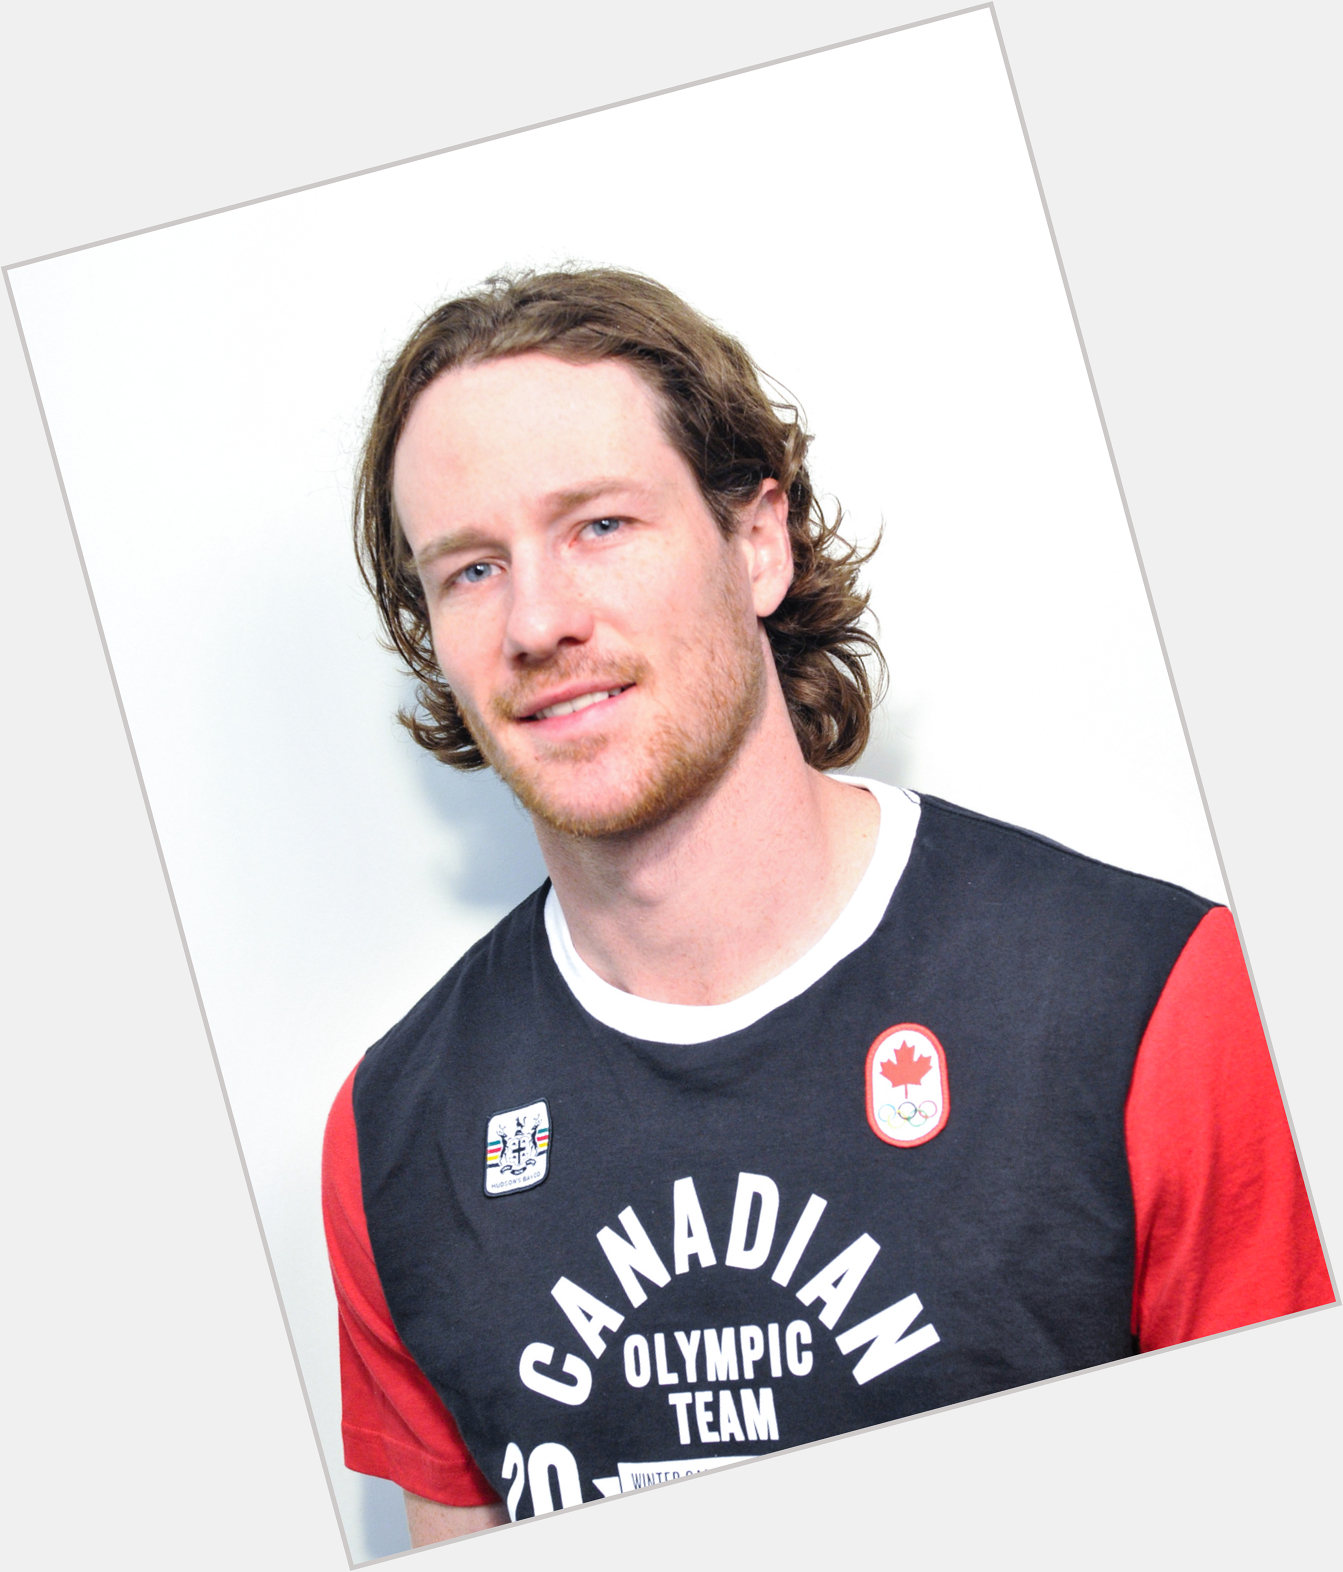 Http://fanpagepress.net/m/D/Duncan Keith New Pic 1